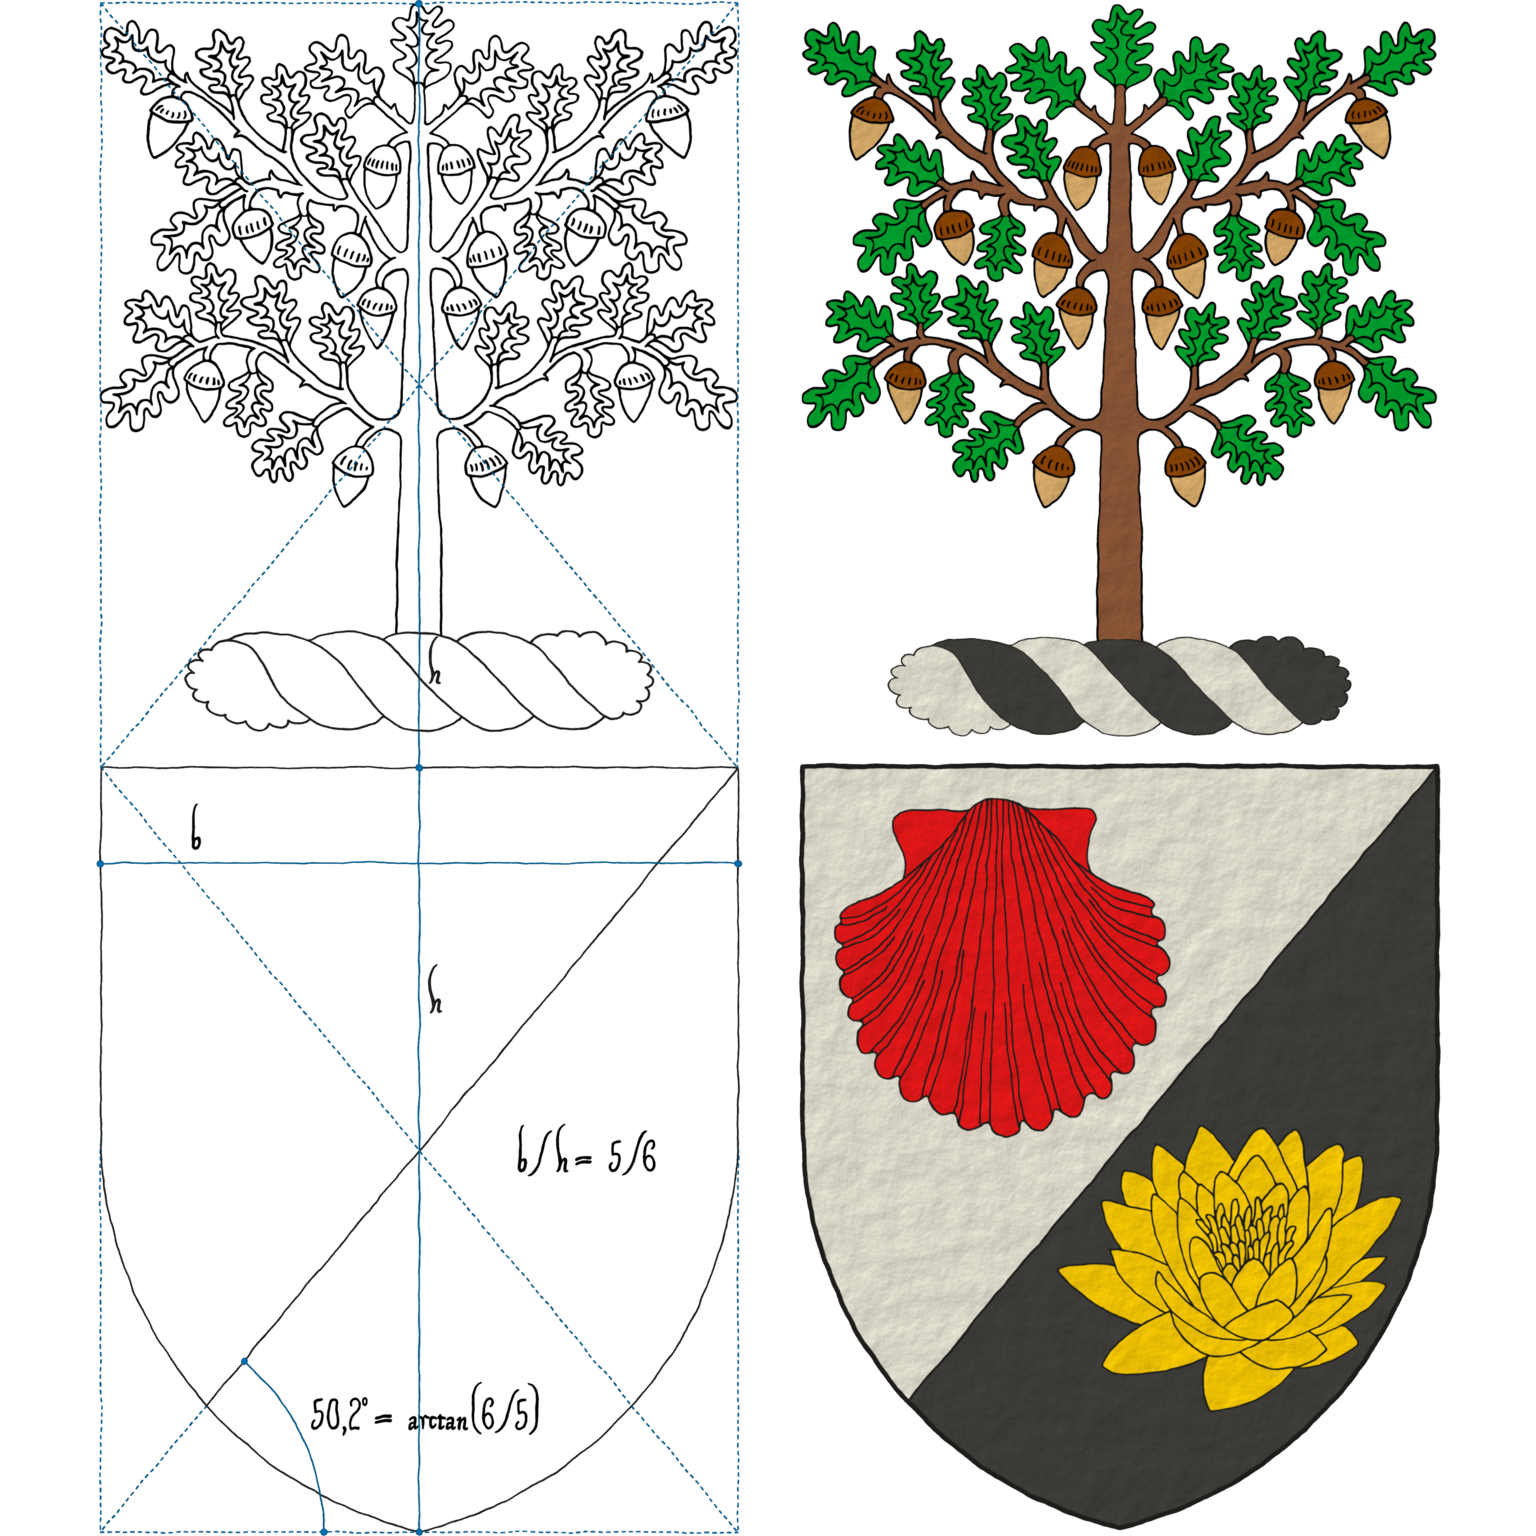 Arms of Alain Fontaine emblazoned by me in 2 steps. Blazon: Per bend sinister, Argent an escallop Gules and Sable a lotus flower Or. Crest: On a wreath Argent and Sable an oak-tree fructed proper.